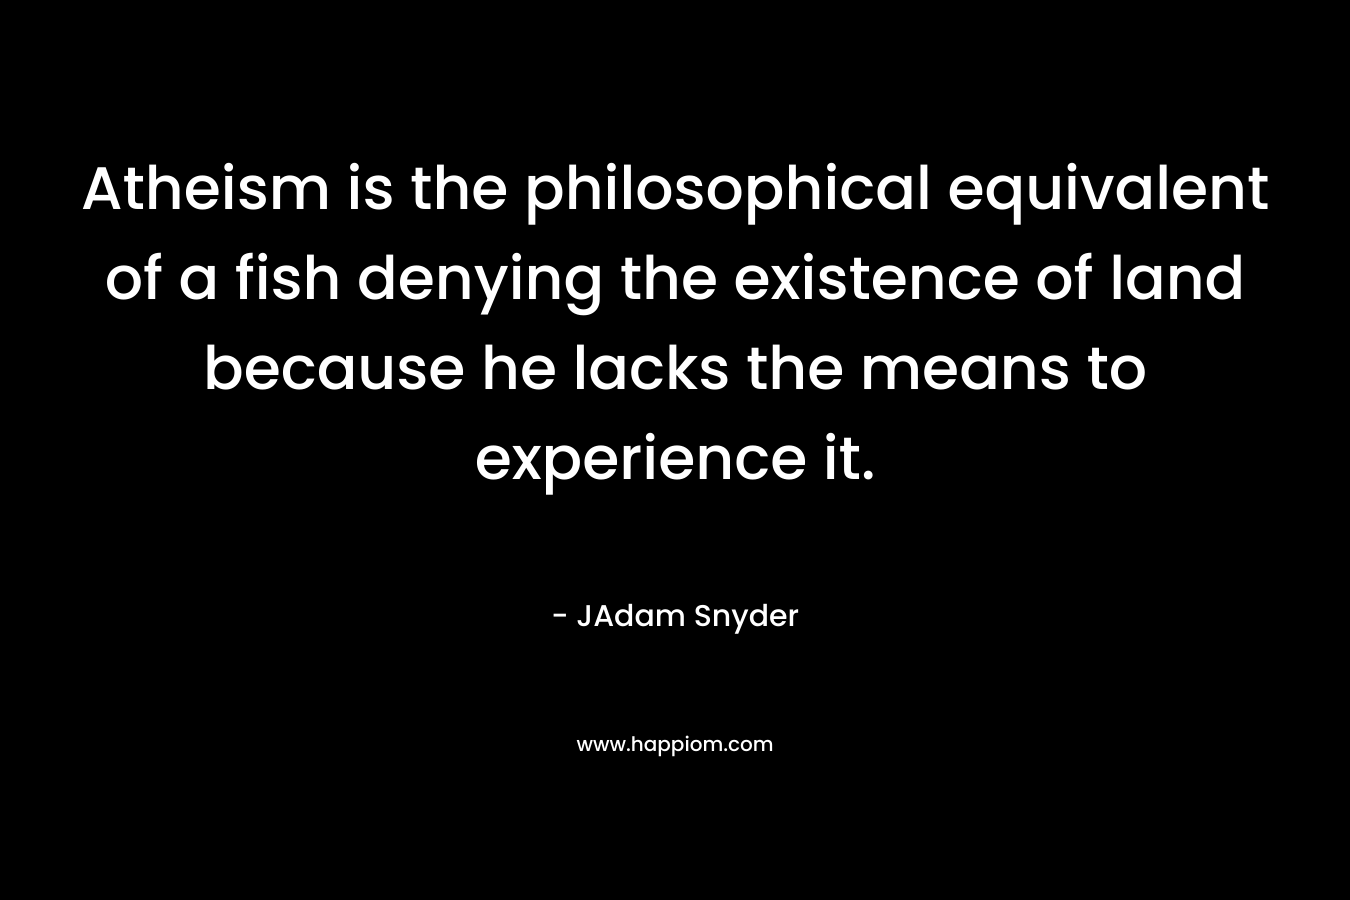 Atheism is the philosophical equivalent of a fish denying the existence of land because he lacks the means to experience it.